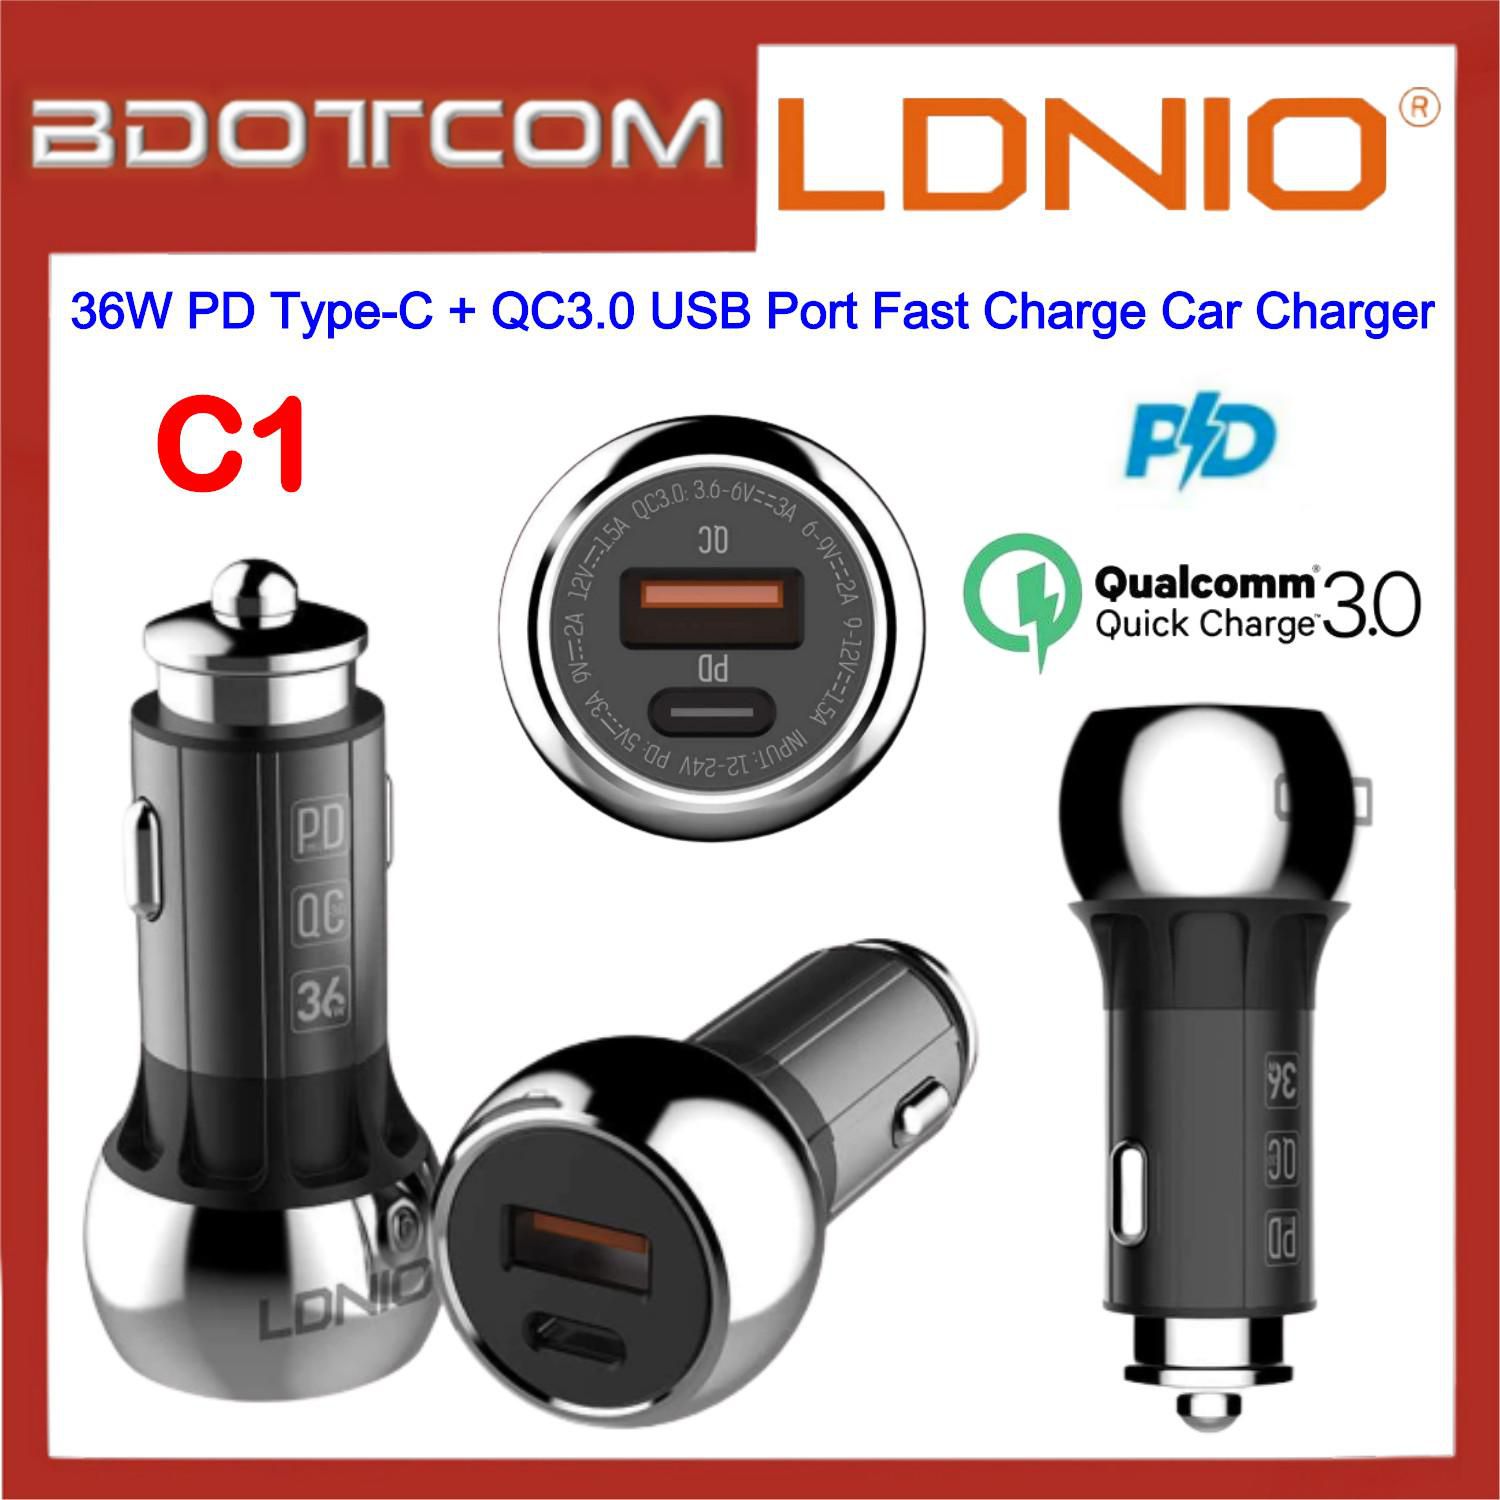 LDNIO C1 36W PD Type-C + QC3.0 Single USB Port Fast Charge Car Charger